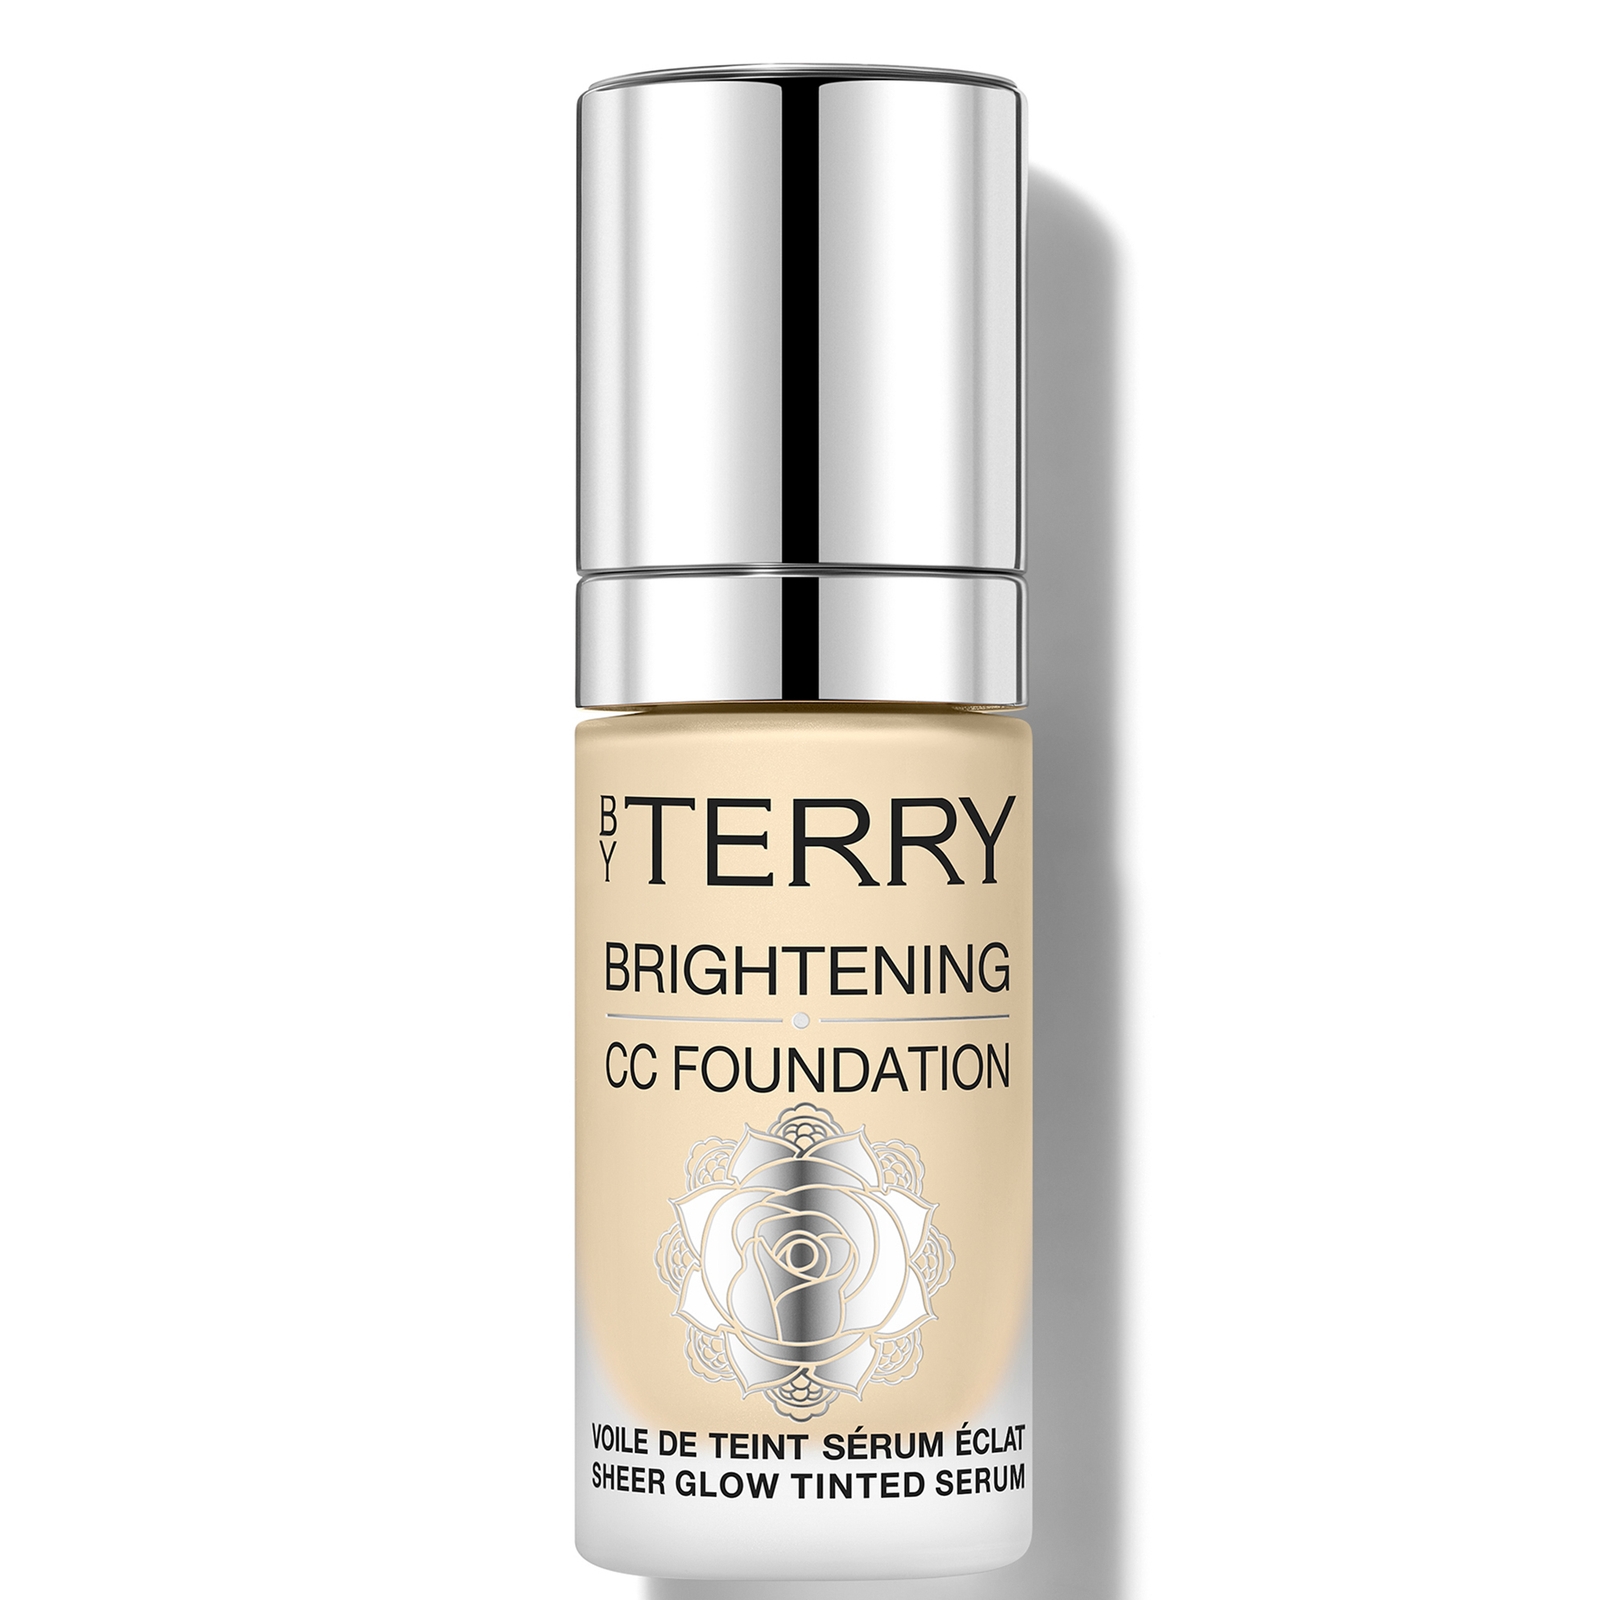 By Terry Brightening Cc Foundation 30ml (various Shades) - 1w - Fair Warm In White